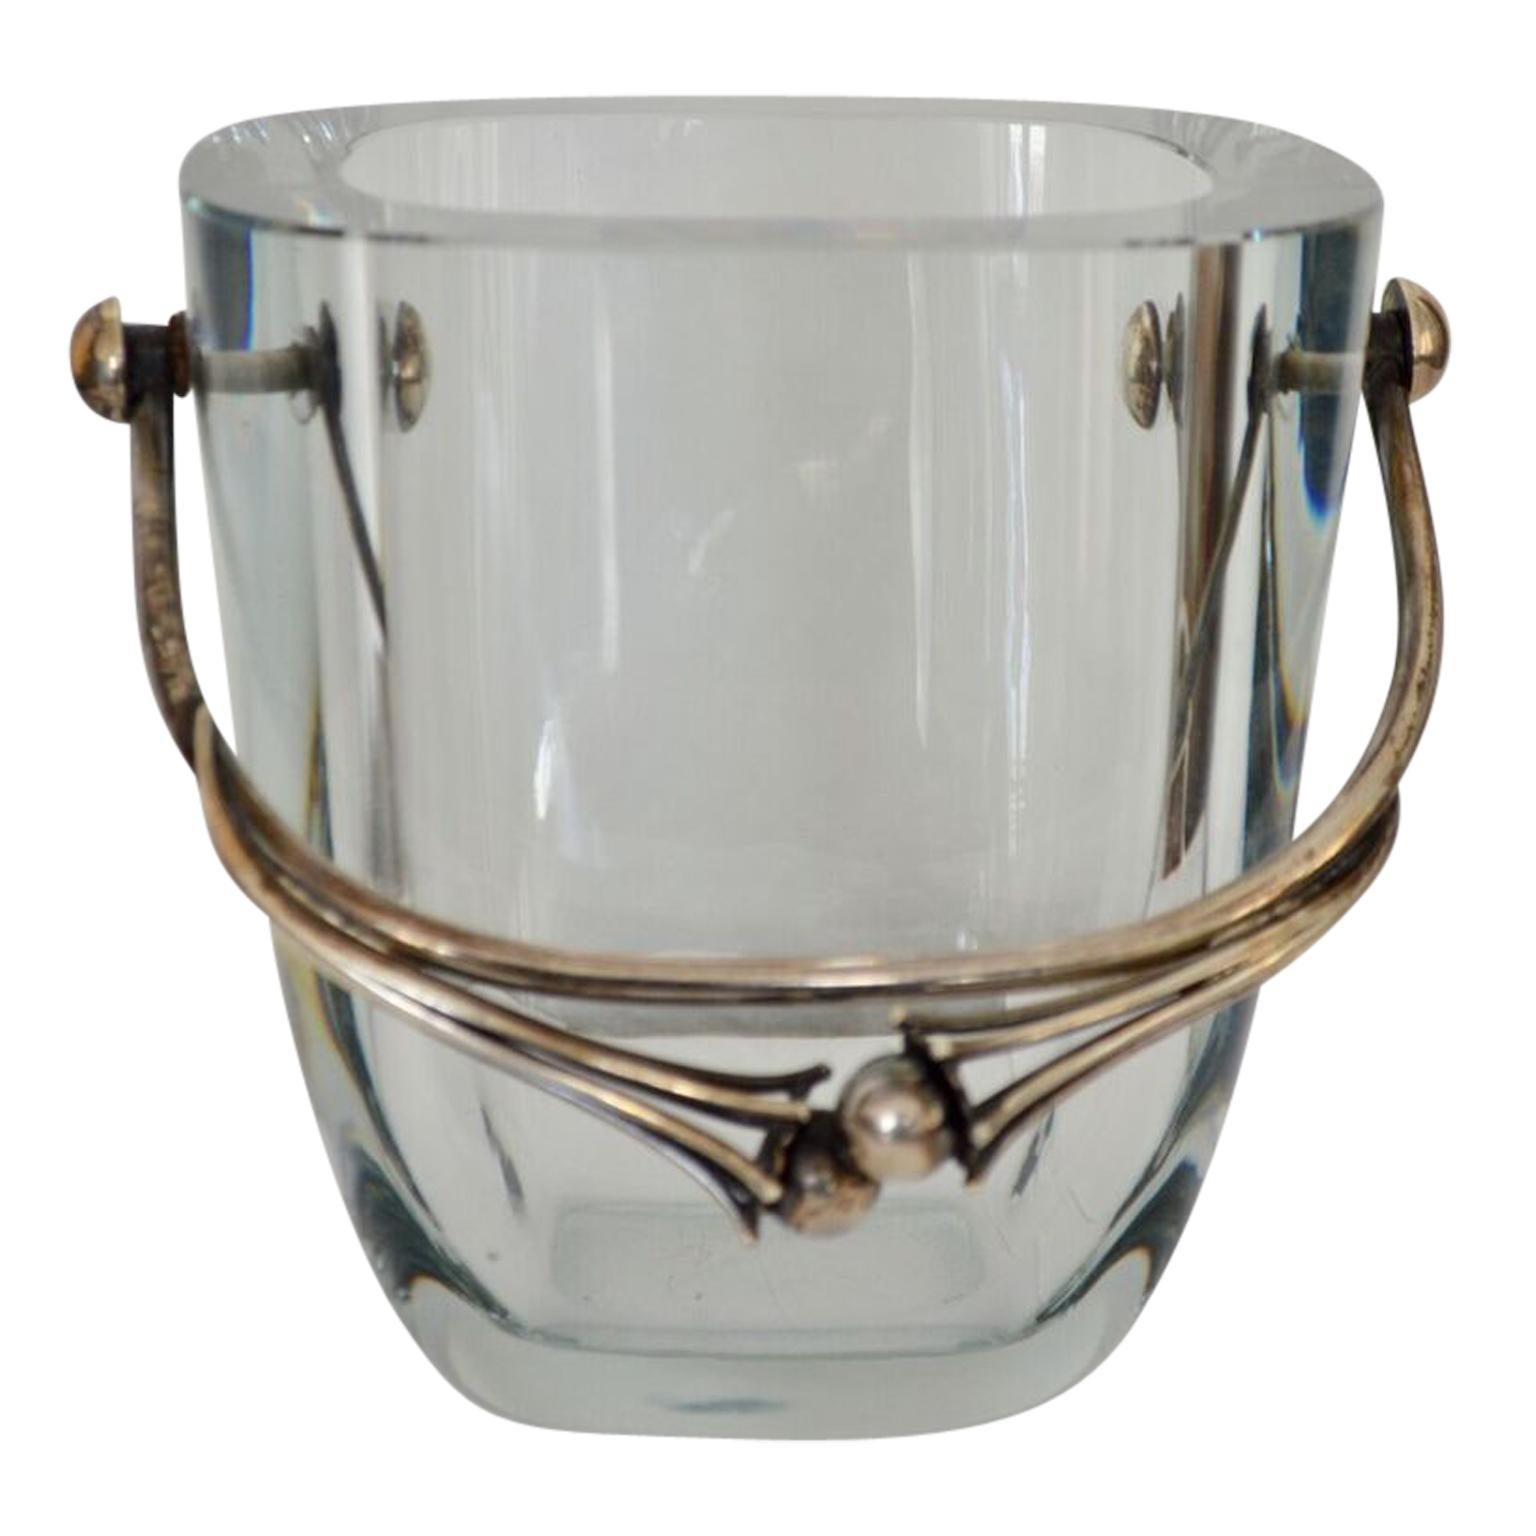 Transparent blue glass vessel, mounted with a finely wrought sterling silver handle with grape decorations. Hallmarked.